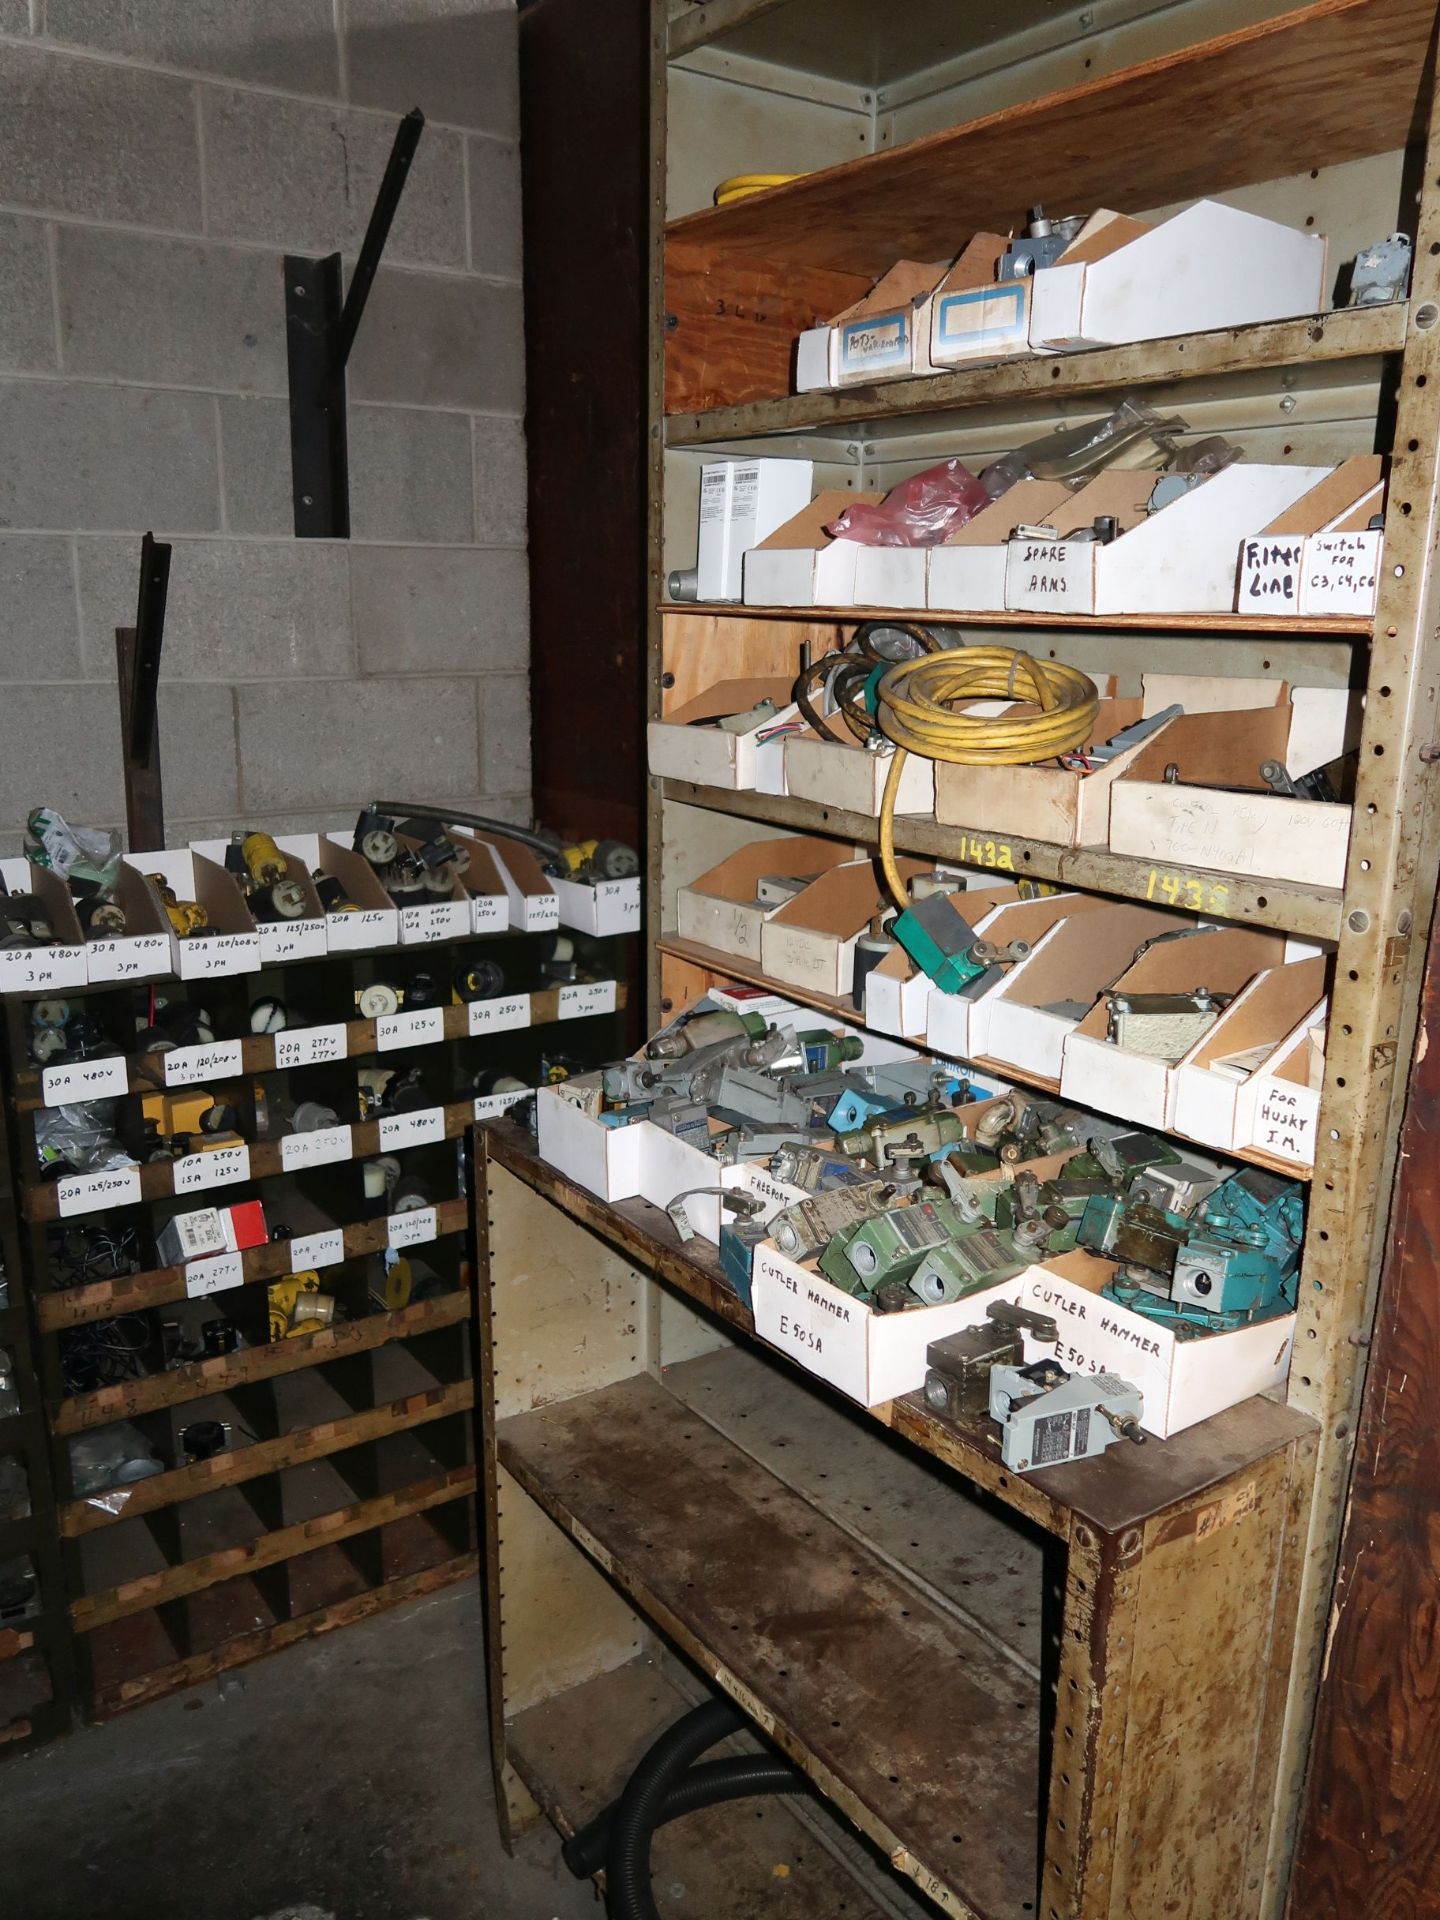 CONTENTS OF (7) CABINETS INCLUDING HARDWARE, SWITCHES, CONTROLS, PLATES, ELECTRICAL HARDWARE, - Image 6 of 6